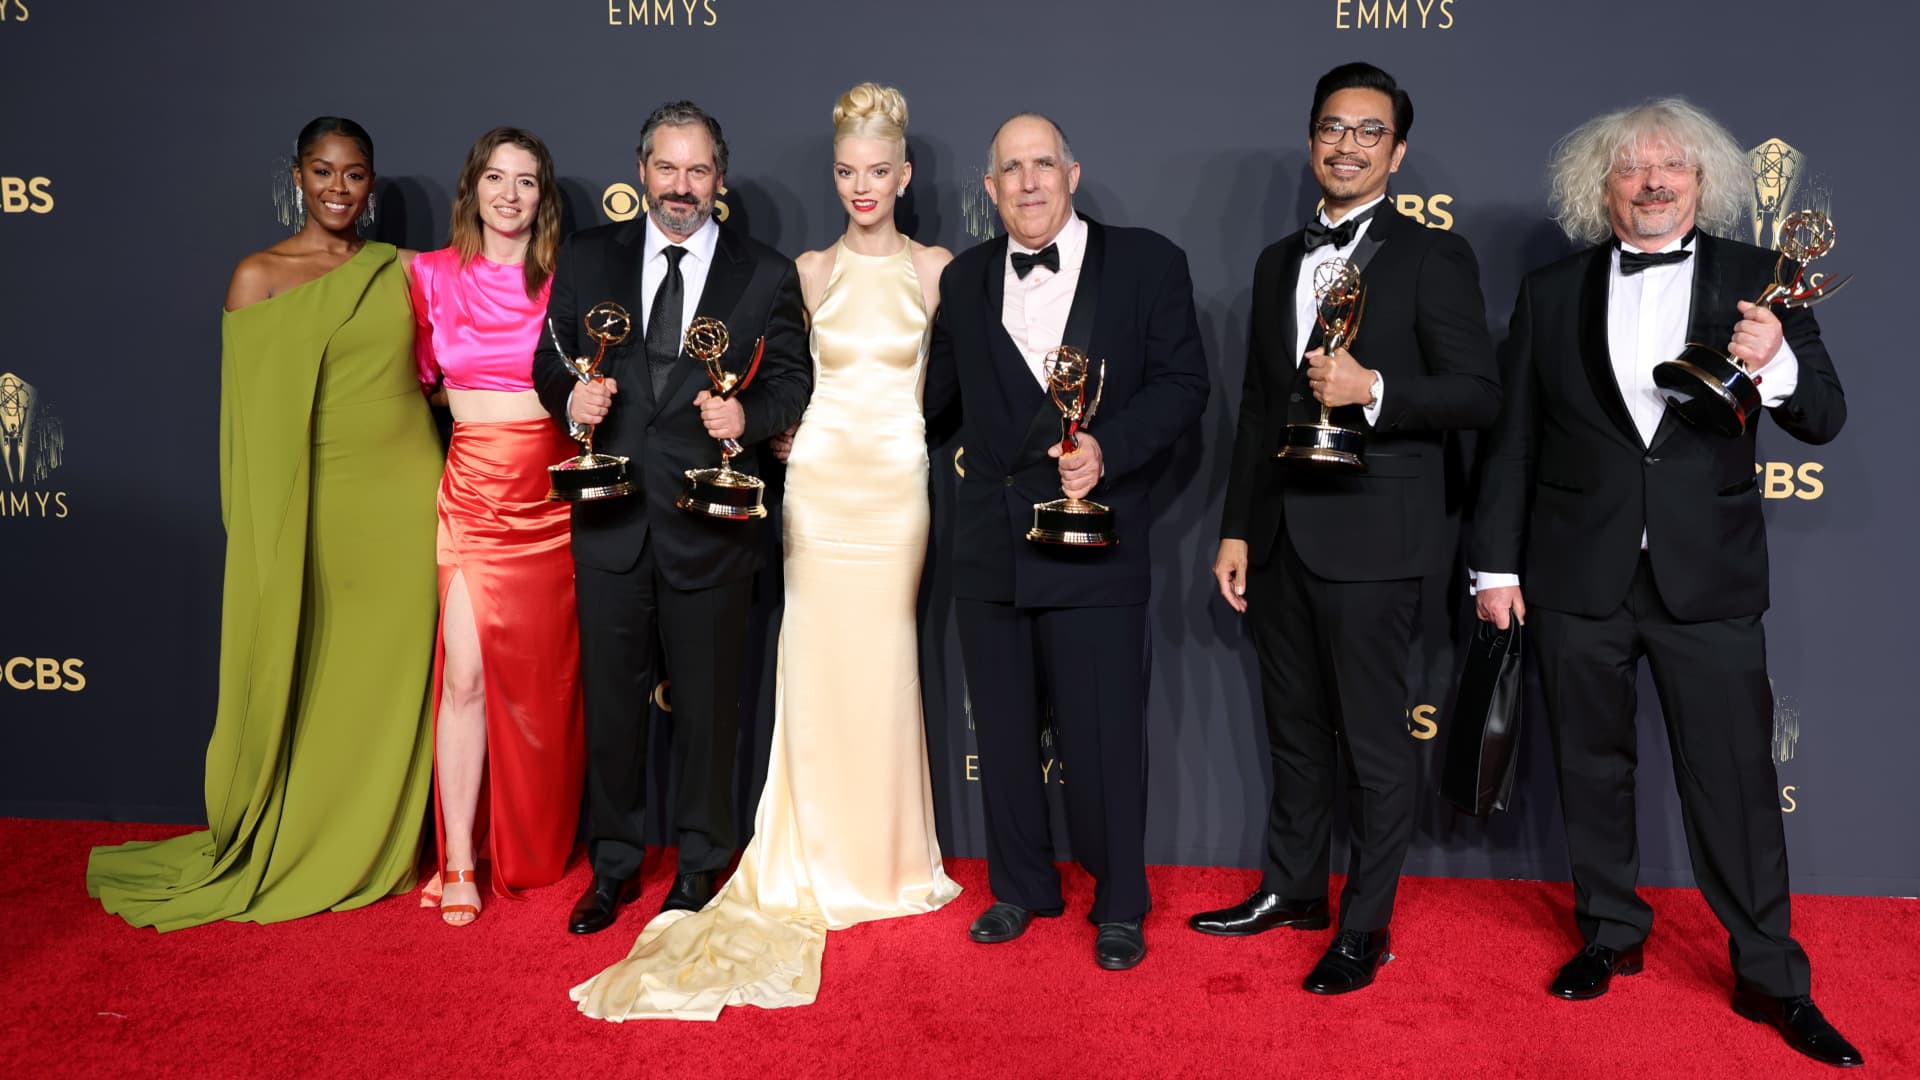 (L-R) Moses Ingram, Marielle Heller, Scott Frank, Anya Taylor-Joy, William Horberg, Mick Aniceto, and Marcus Loges, winners of the Outstanding Limited Or Anthology Series award for ‘The Queen's Gambit,' pose in the press room during the 73rd Primetime Emmy Awards at L.A. LIVE on September 19, 2021 in Los Angeles, California.